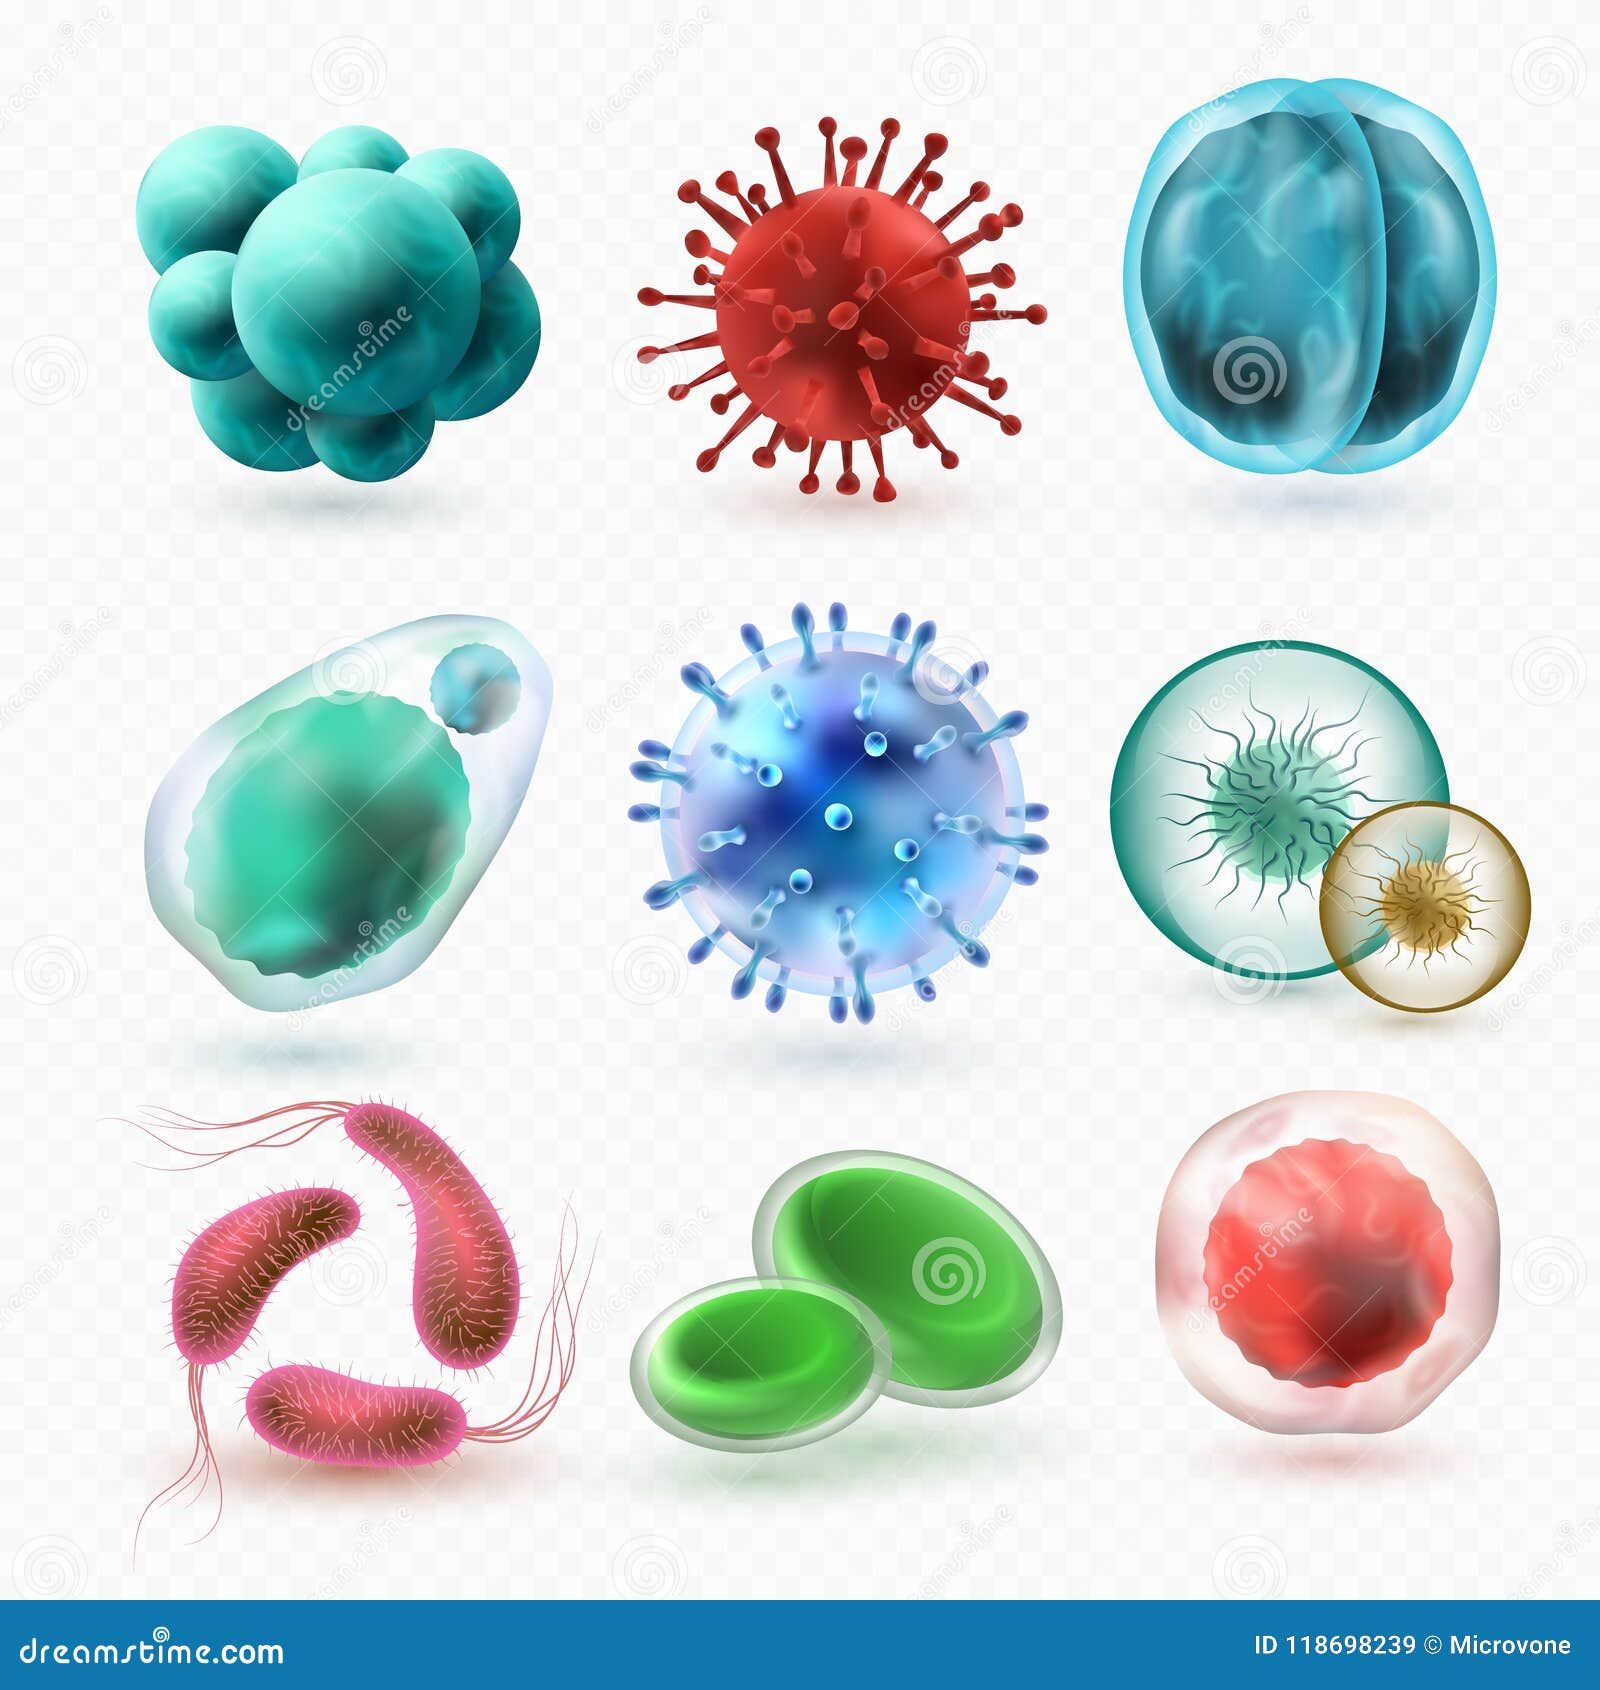 various microscopic 3d bacteria and viruses. microbiology  bacterium cells 